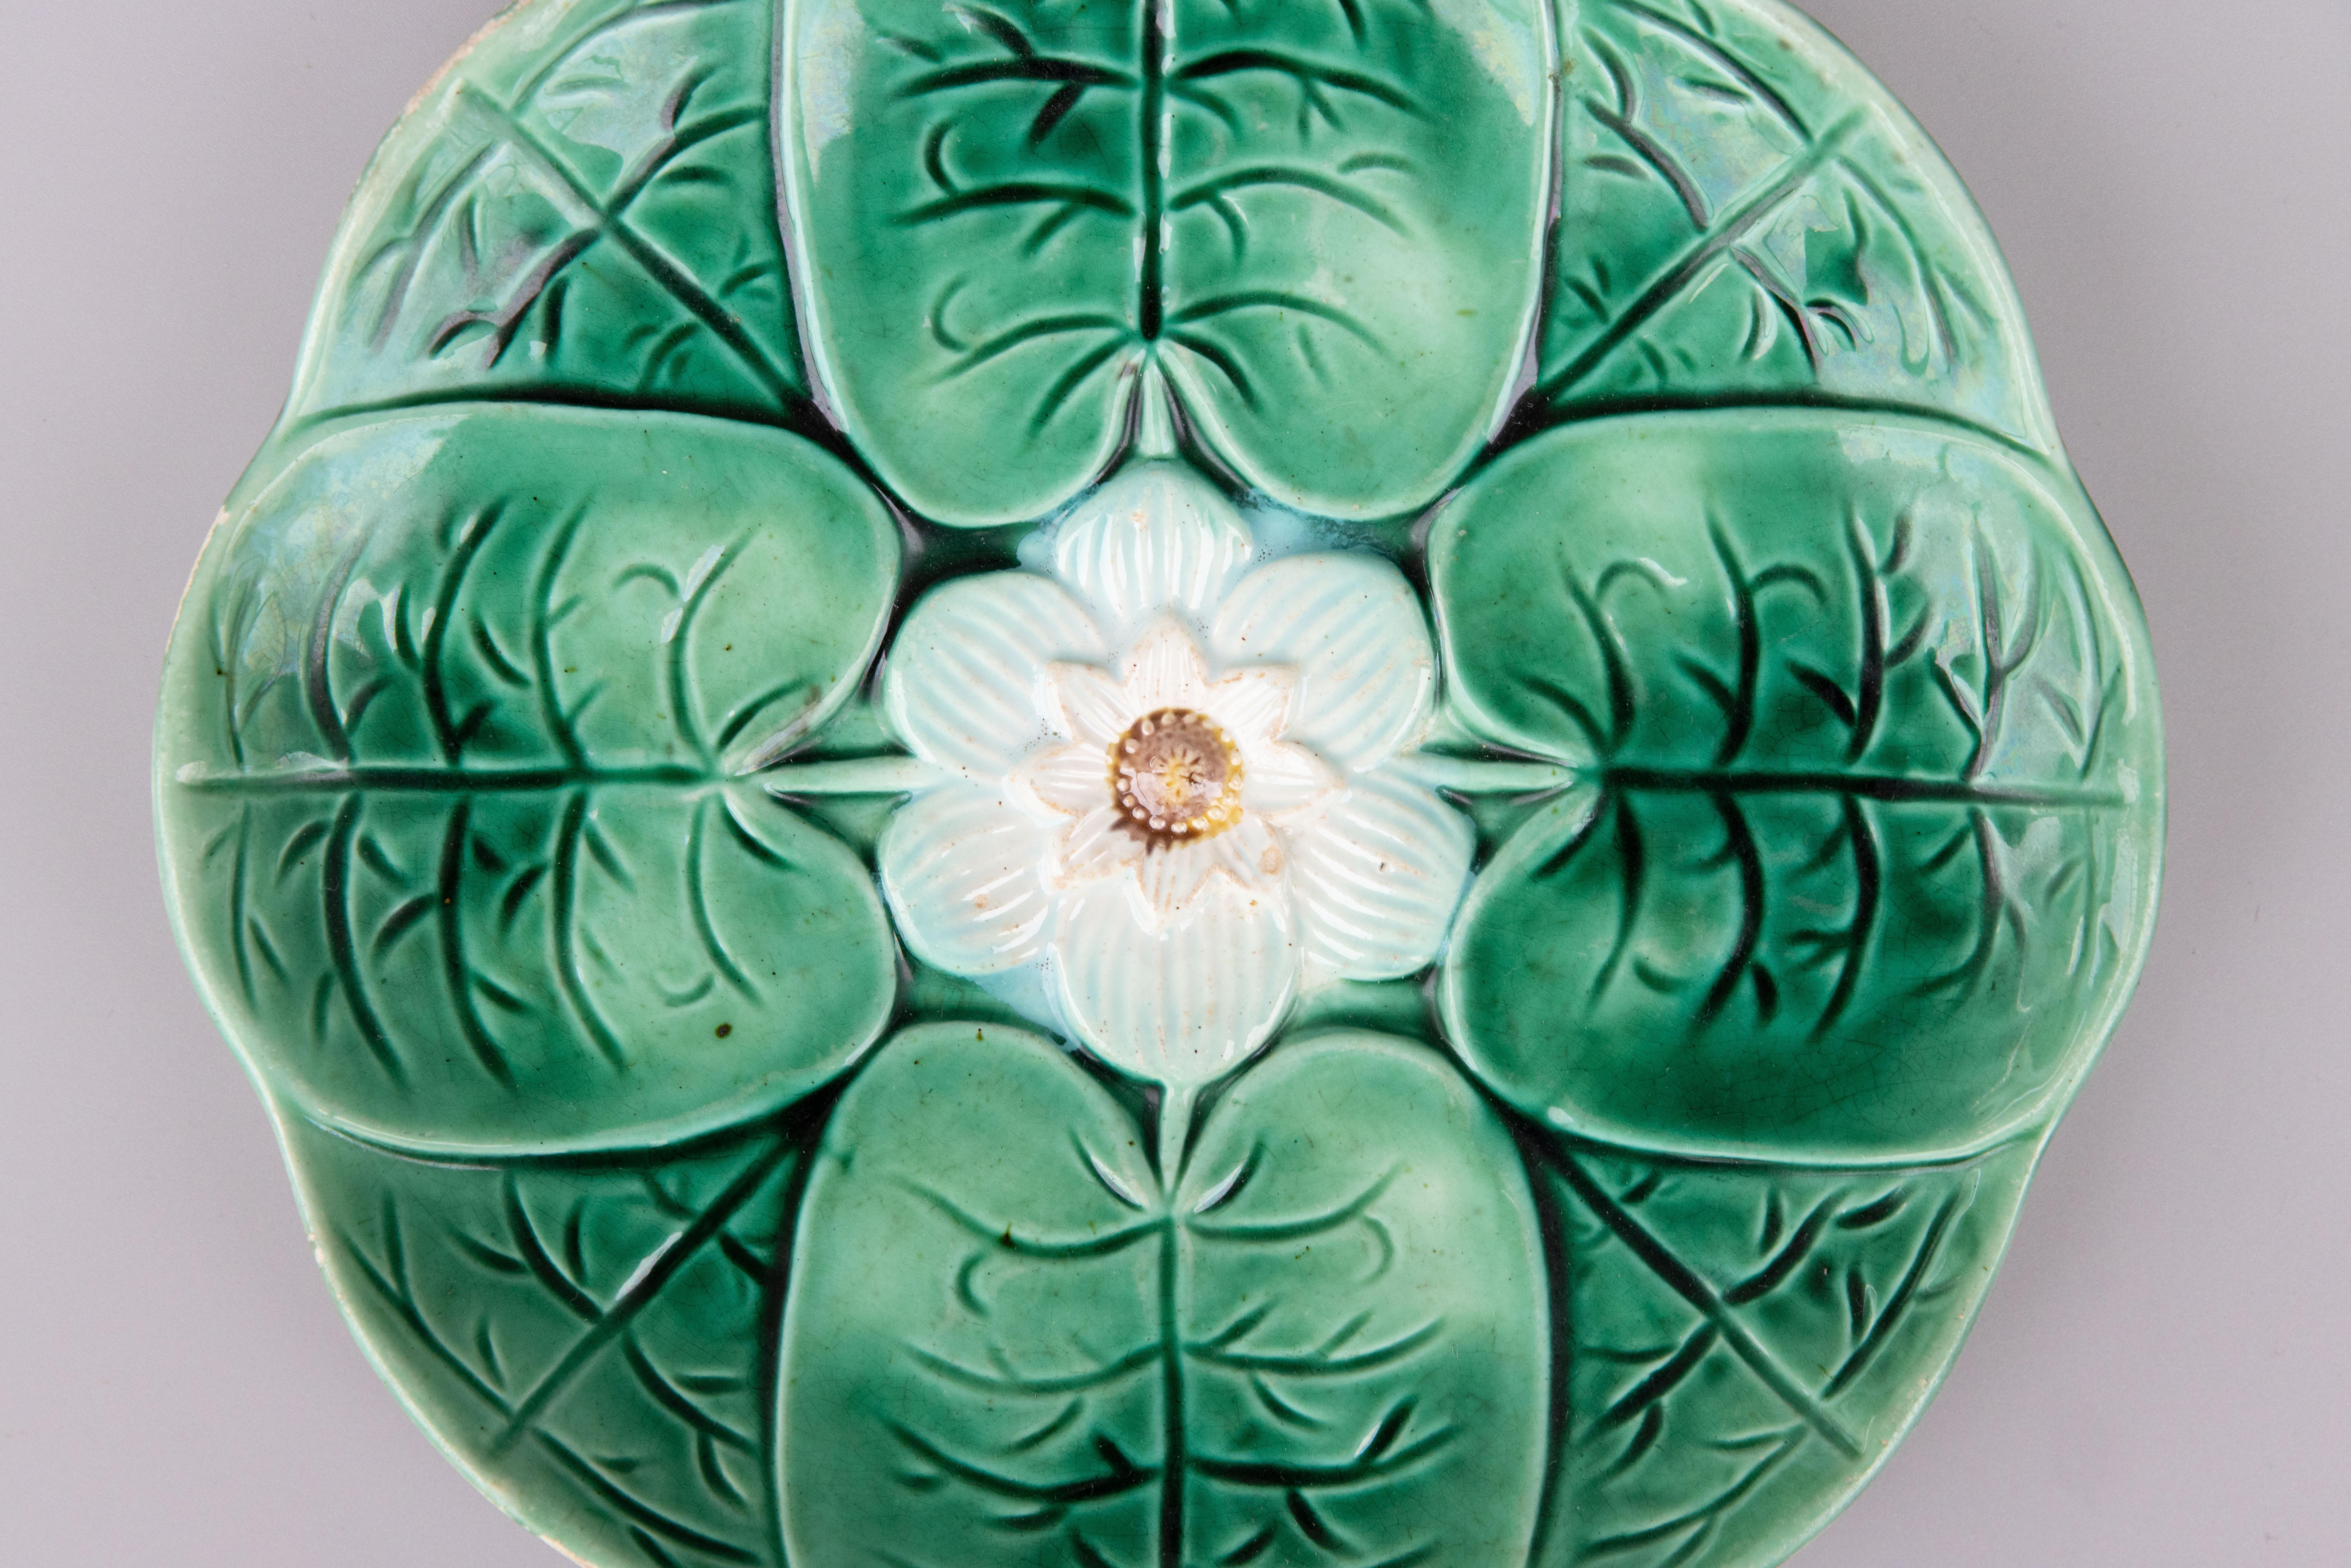 A lovely antique English green glazed majolica water lily lotus plate attributed to Joseph Holdcroft, circa 1870. It displays beautifully and would be wonderful hung on a wall or placed in a cabinet or added to a collection.

Dimensions
9.25